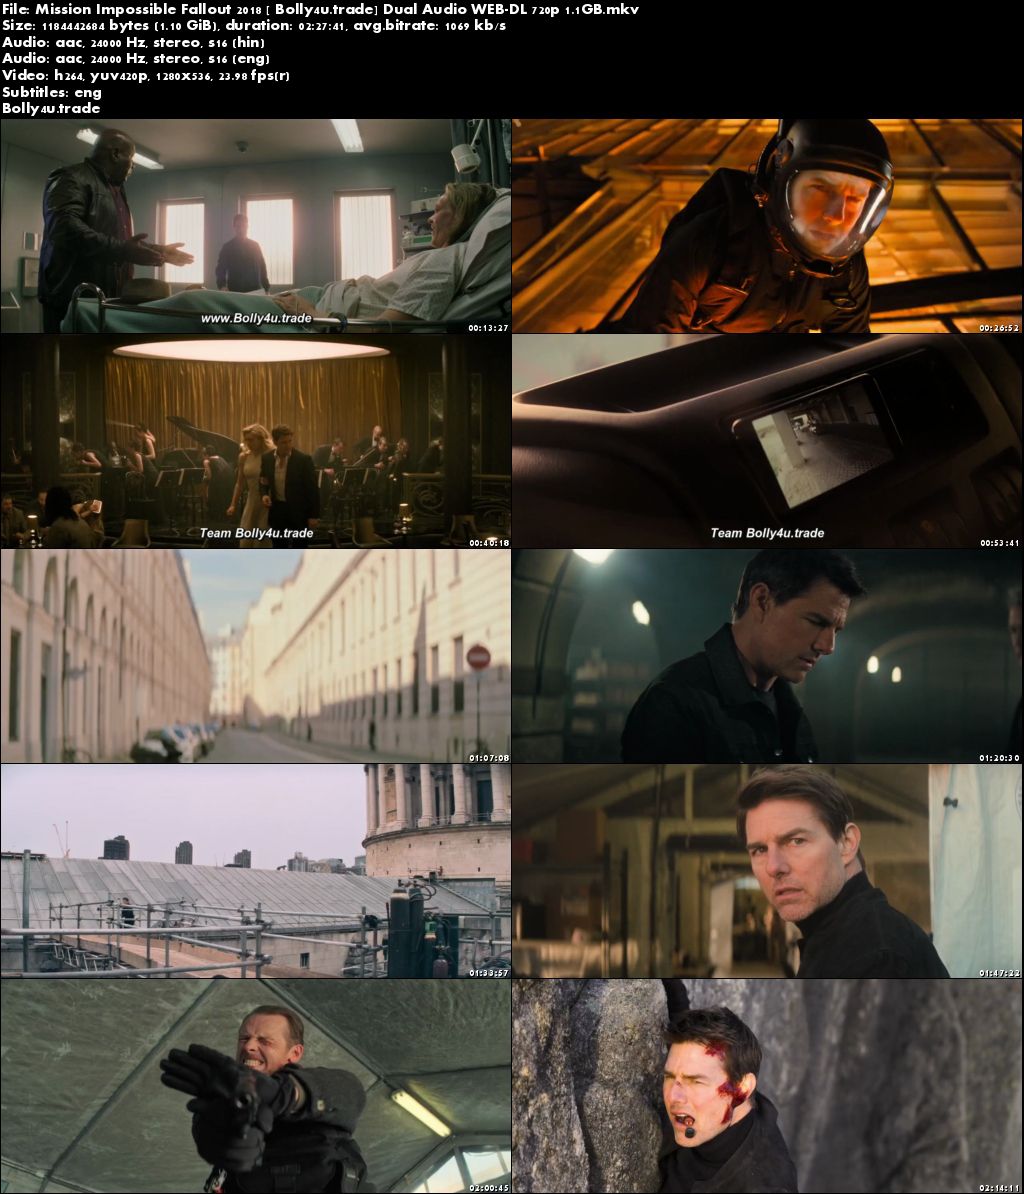 Mission Impossible Fallout 2018 WEB-DL Hindi Dual Audio 720p ESub Download